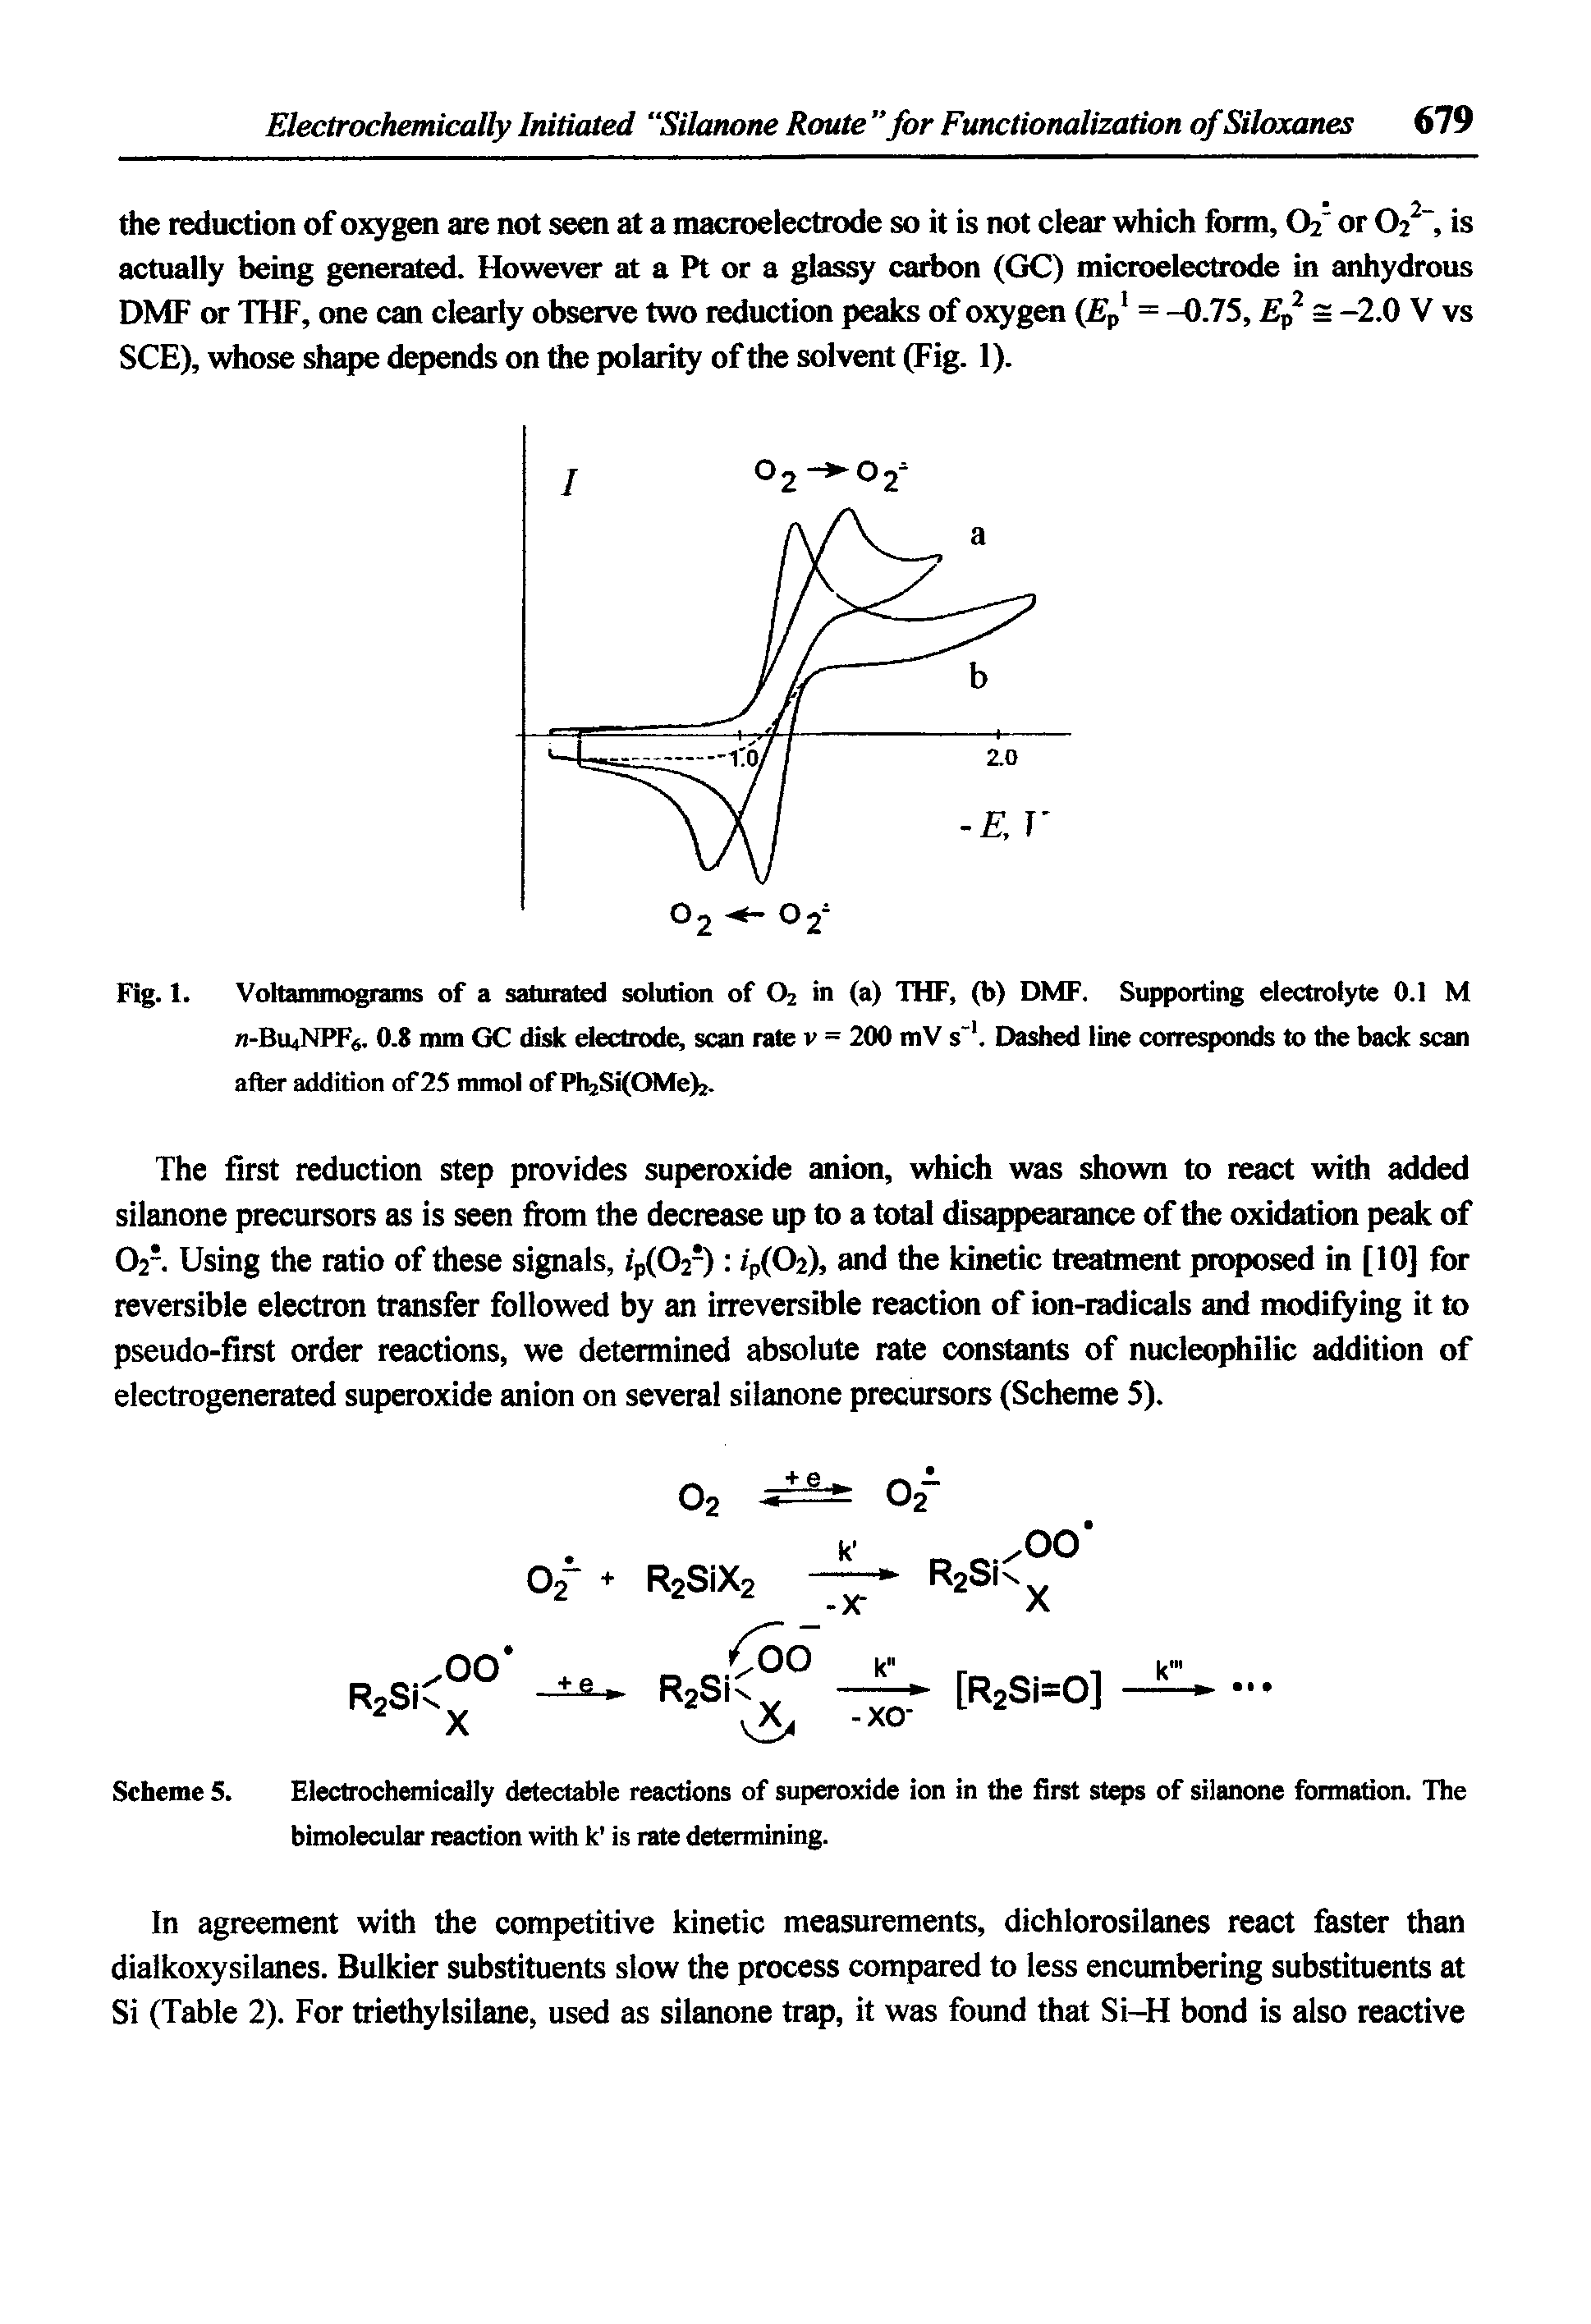 Scheme 5. Electrochemically detectable reactions of superoxide ion in the first steps of silanone formation. The bimolecular reaction with k is rate determining.